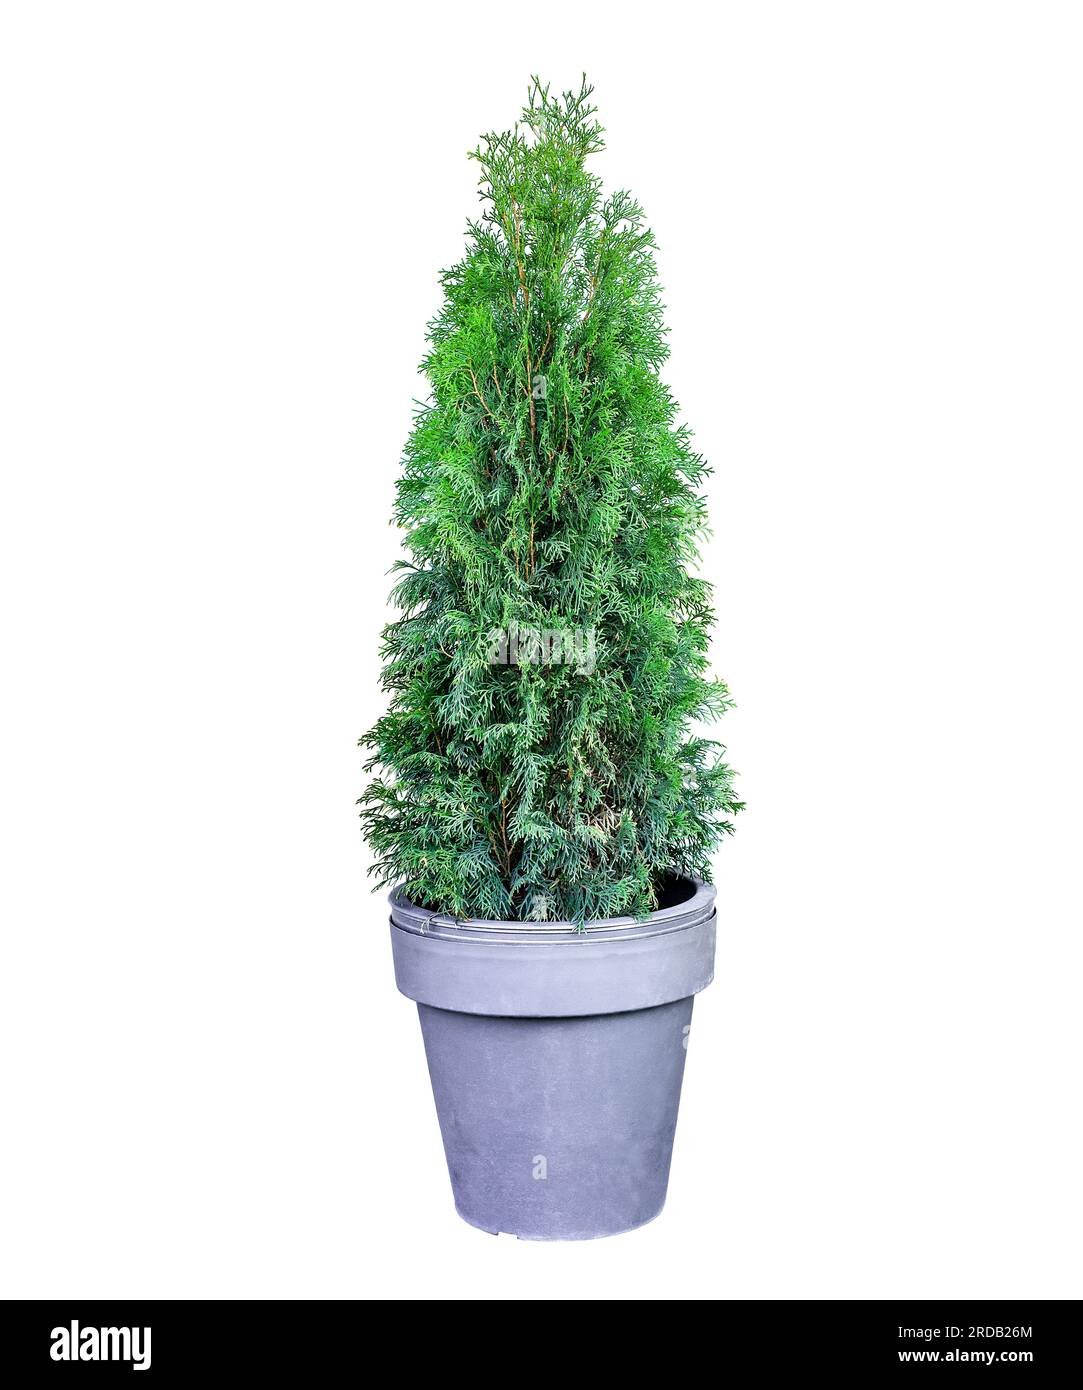 Trimmed thuja growing in large plastic pot isolated on white background. Big potted green thuya growth on winter yard cutout. Cone shape evergreen top Stock Photo